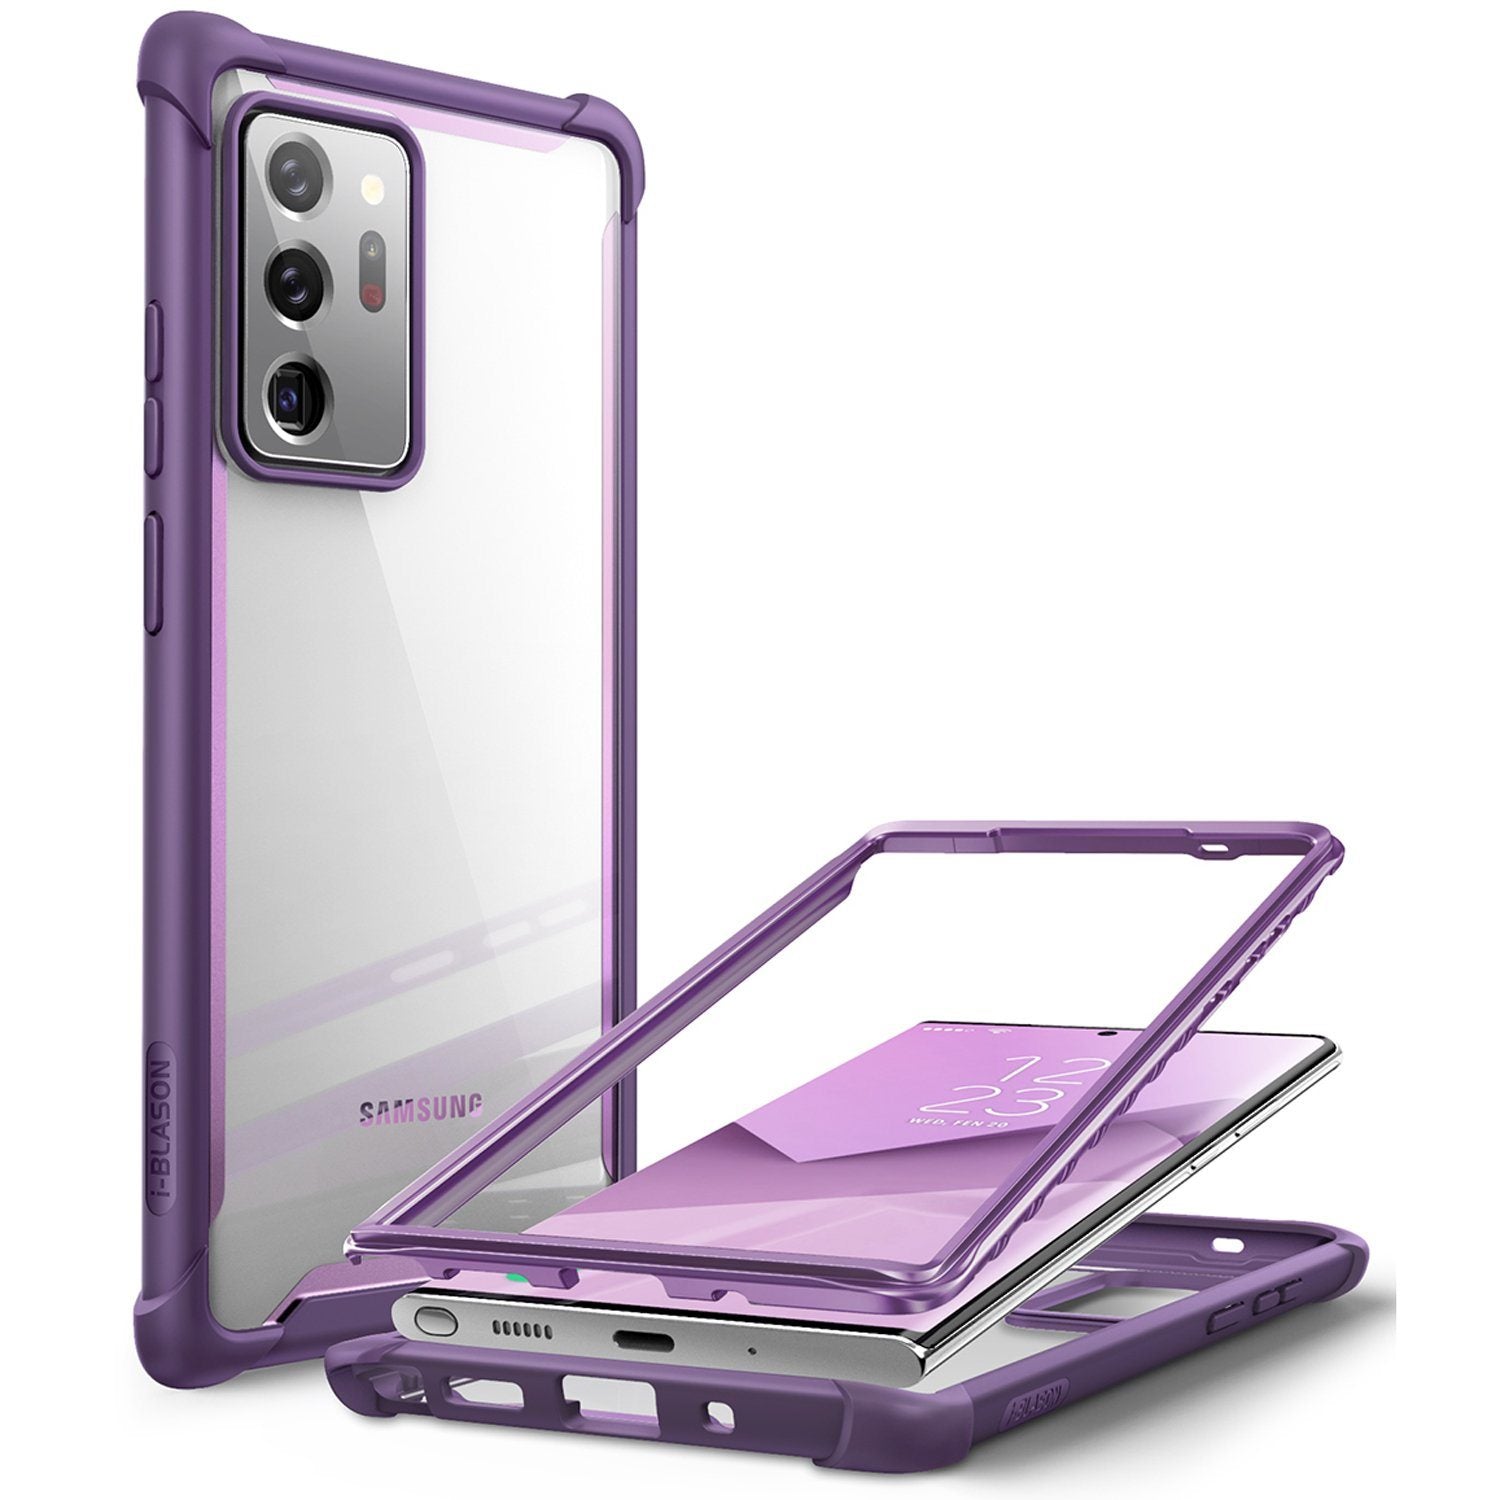 i-Blason Ares Series Clear Case for Samsung Galaxy Note 20 Ultra(Without Screen Protector), Purple Default i-Blason 